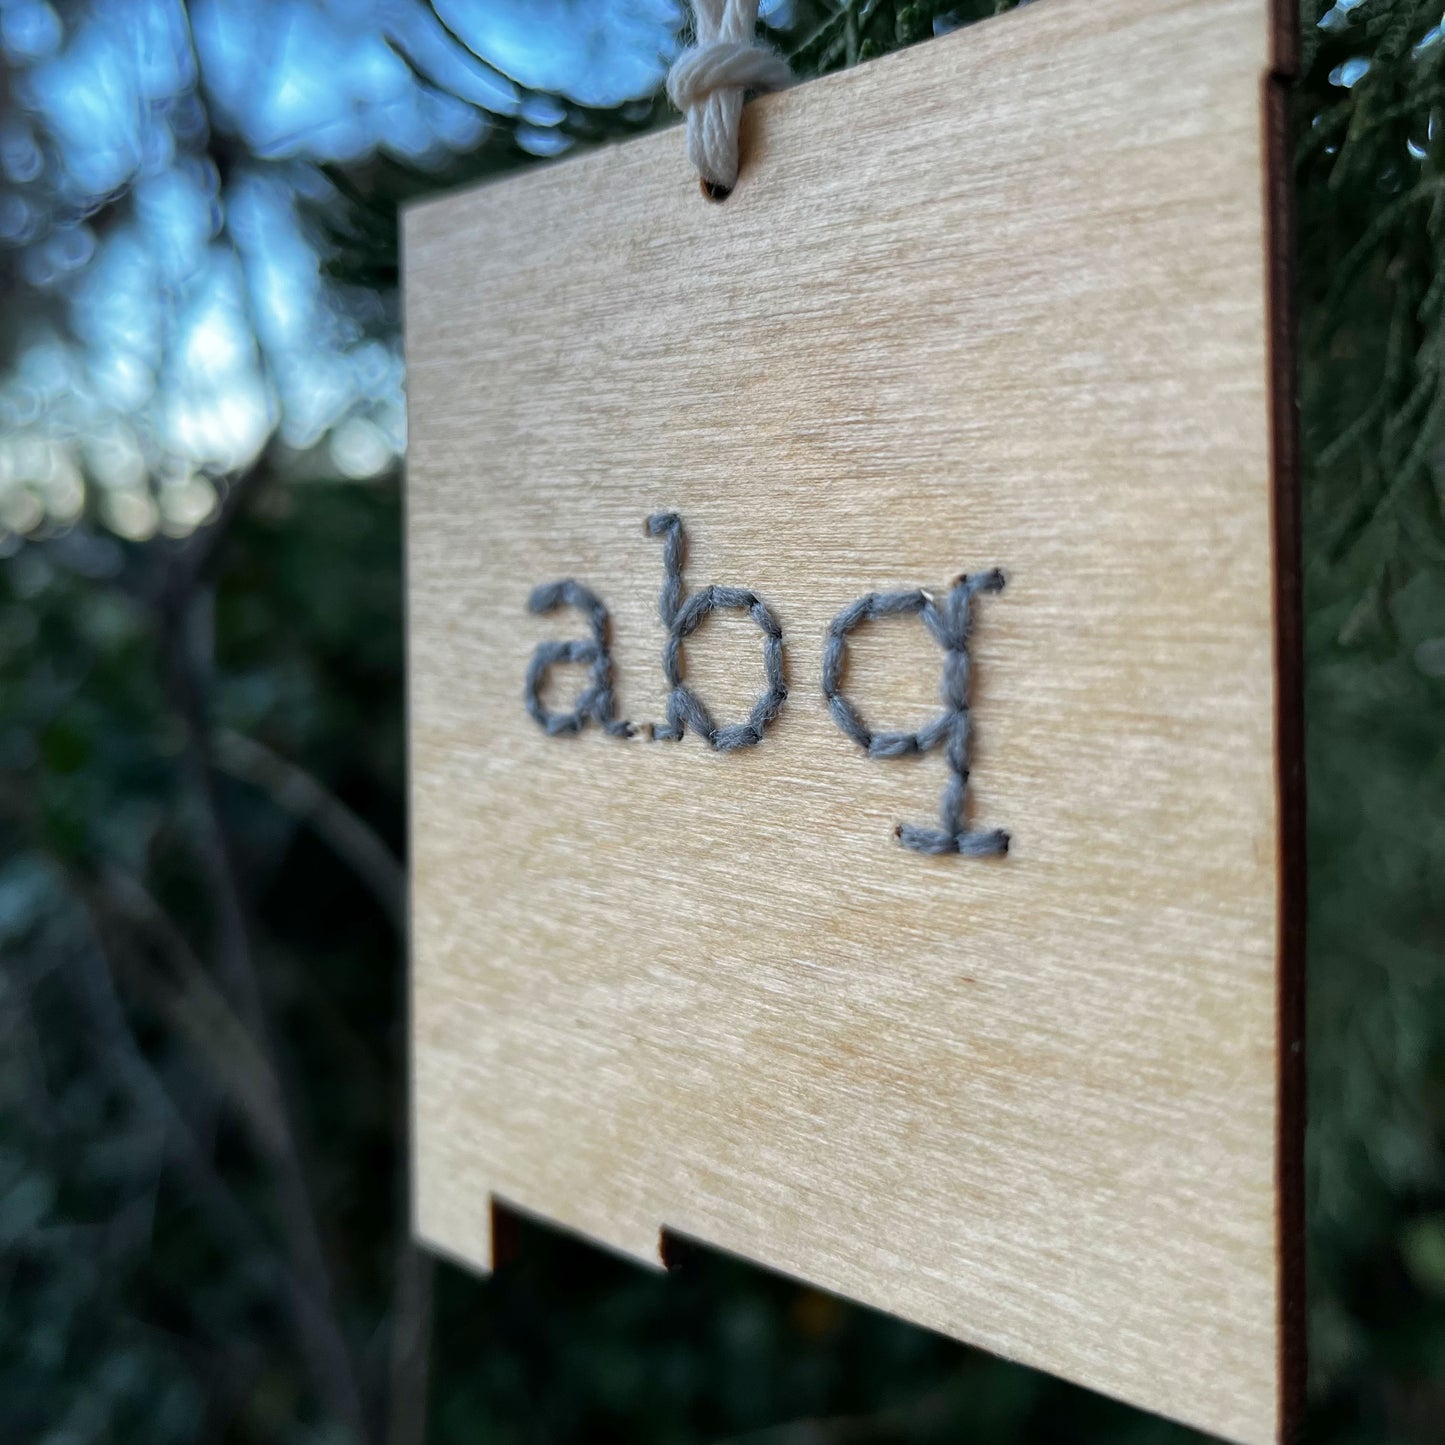 close up view of a laser cut wood ornament in the shape of New Mexico, hand embroidered in grey with the letters abq for Albuquerque, with an off white cord loop hanging on a pine tree